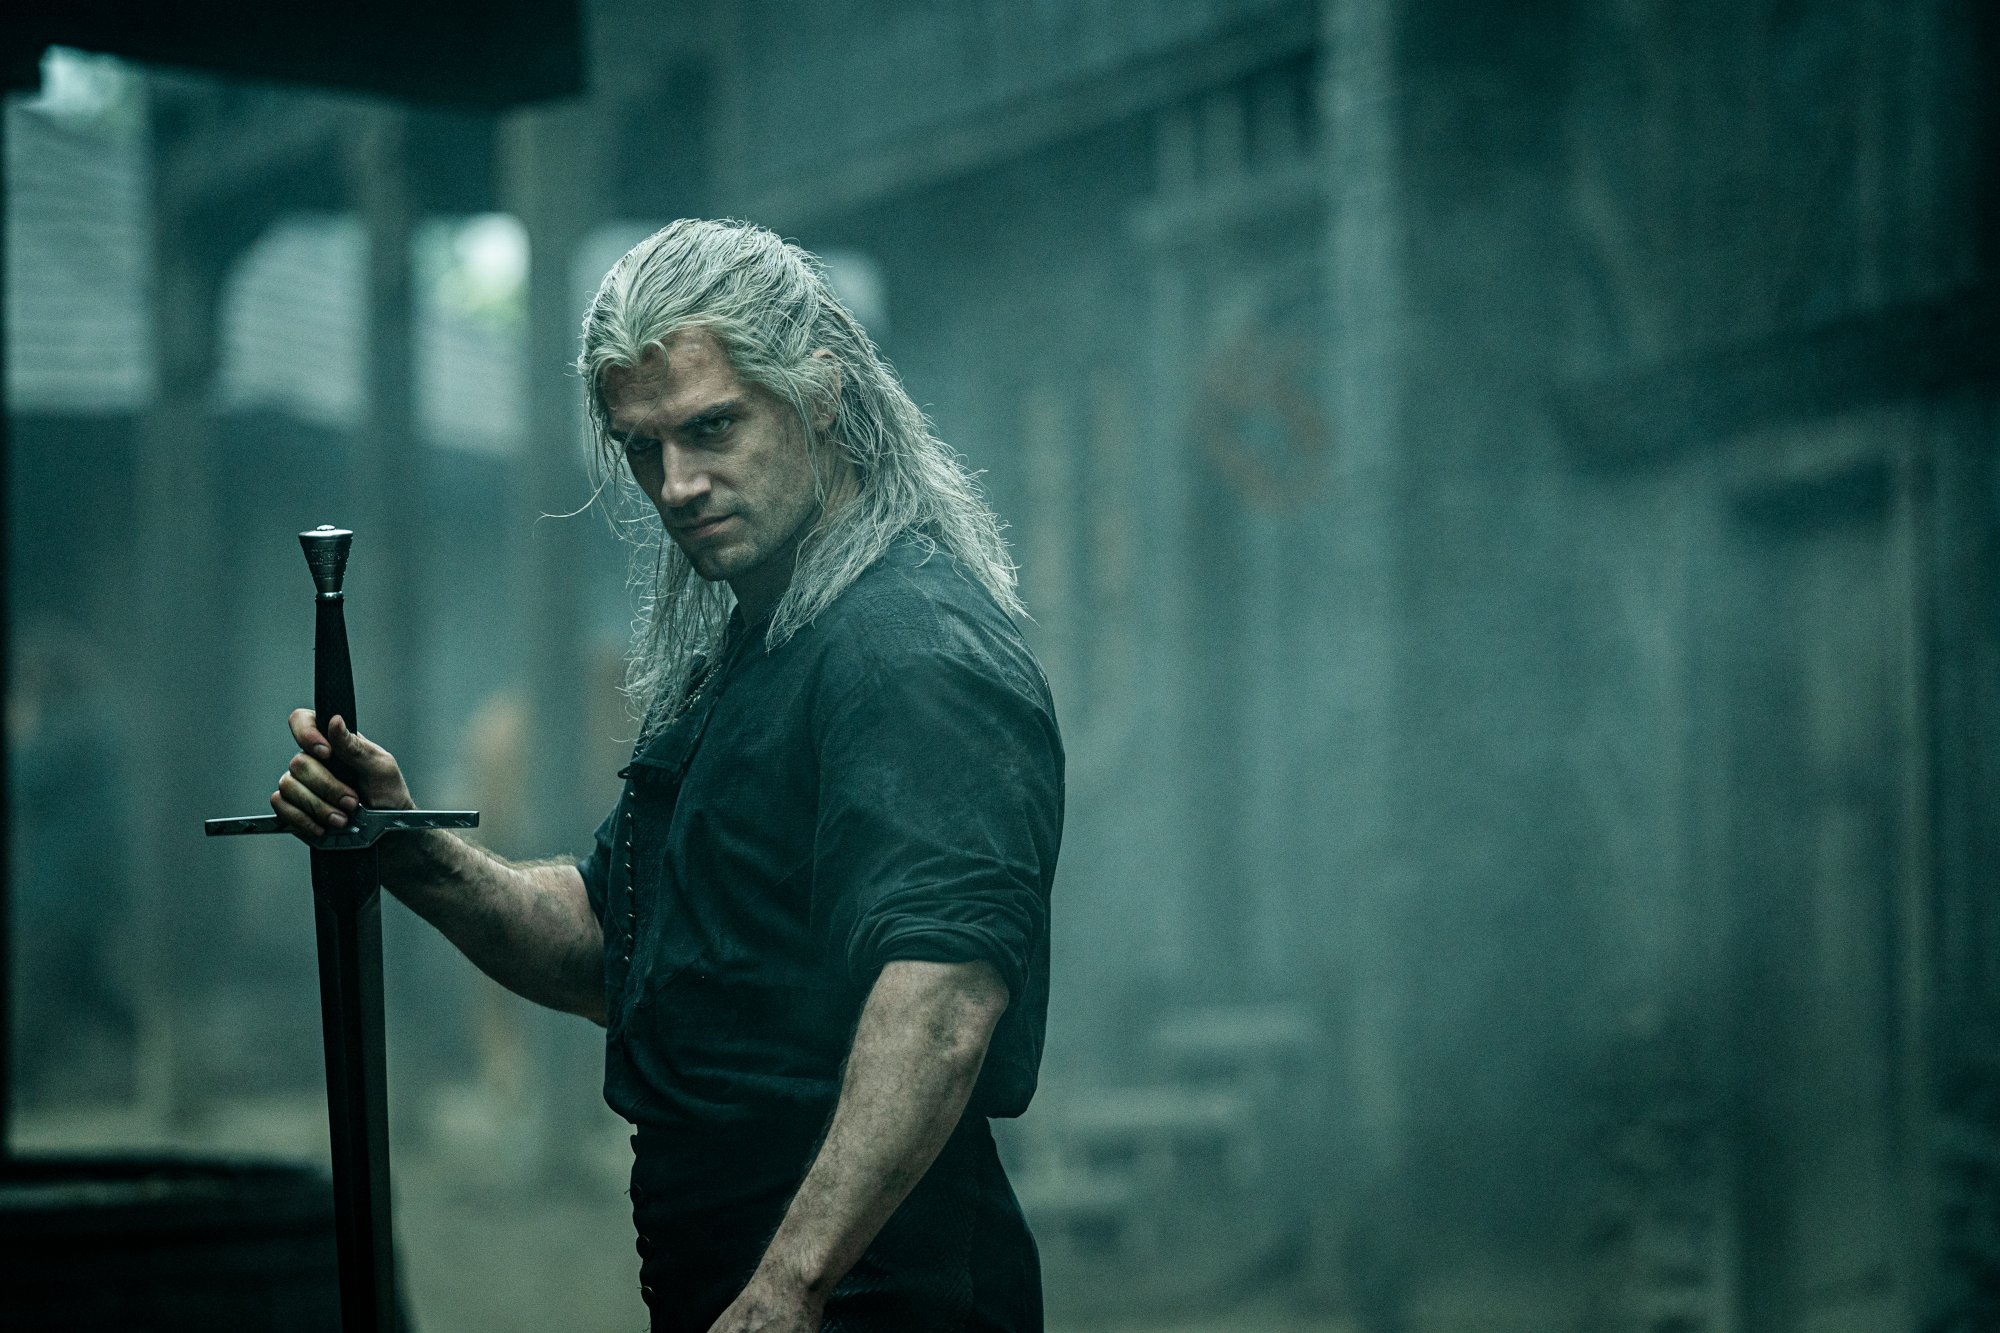 Henry Cavill as Geralt of Rivia on The Witcher. He's wearing a black tunic, holding a sword, and glaring at someone.